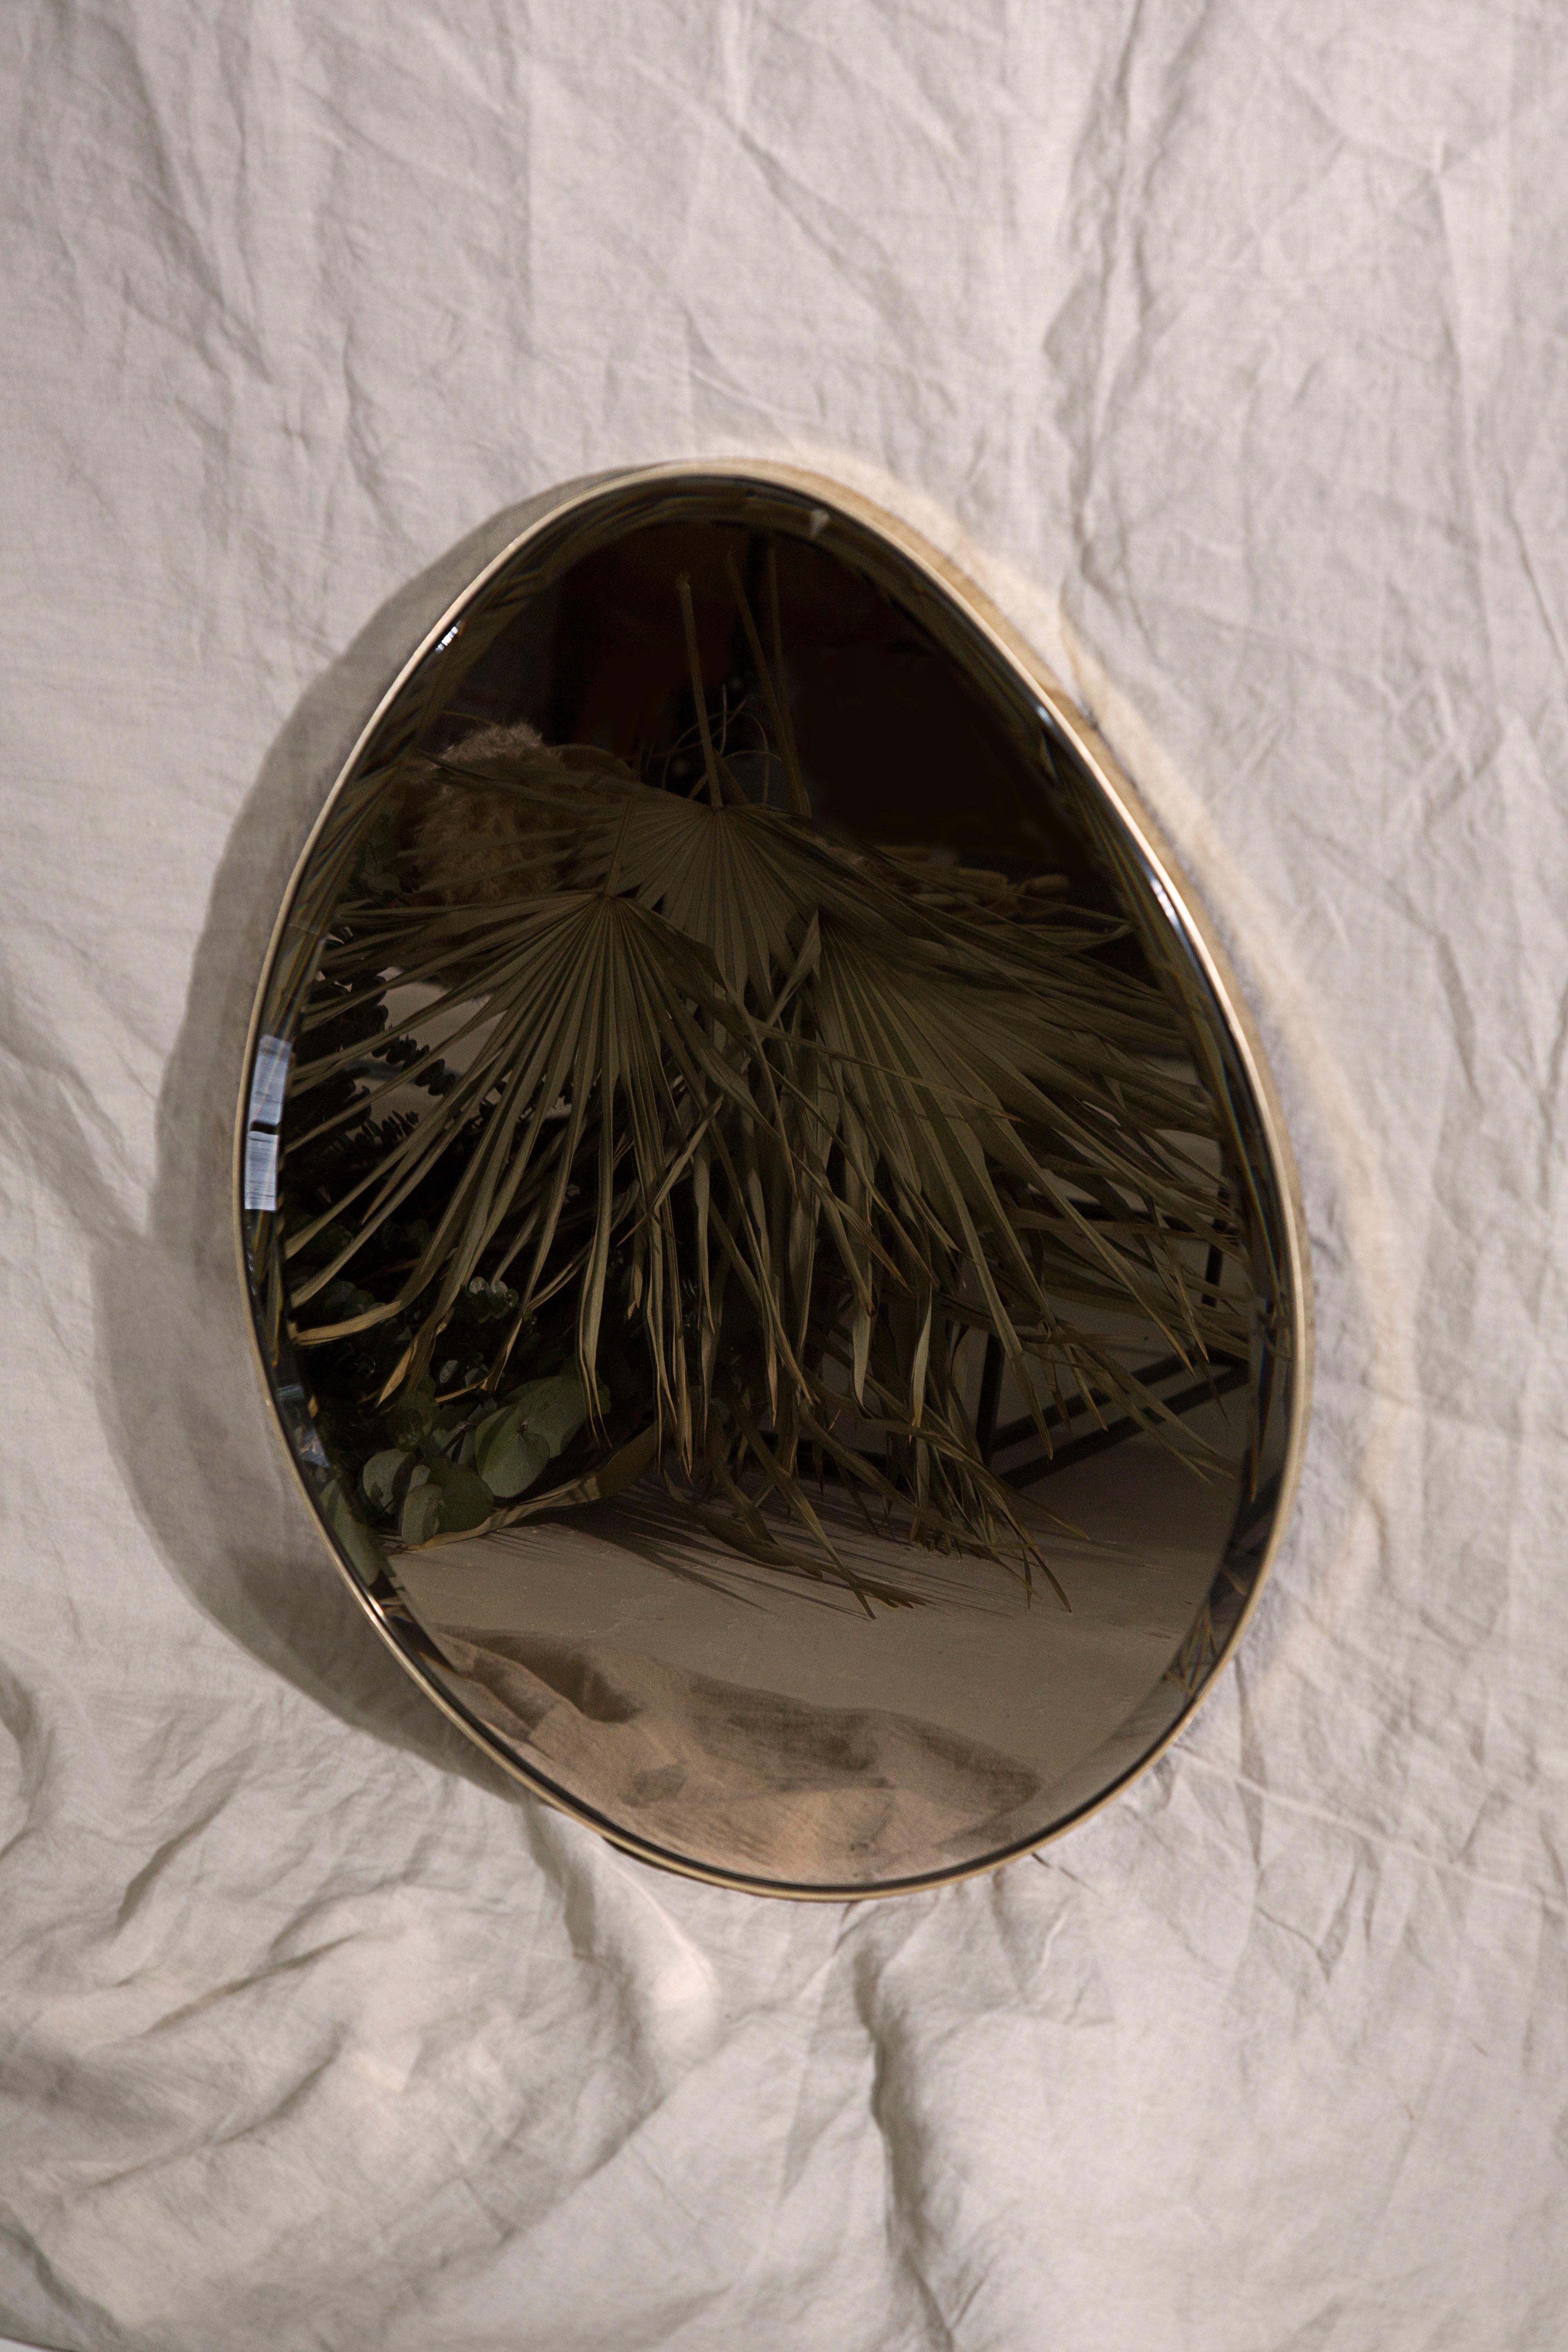 Egg mirror signed by Novocastrian.
Measures: 450 (W) x 600 (H) x 20 (D)
Materials: polished brass.
Custom sizes available.

Novocastrian

We are metalworkers, architects, welders, artists, makers, engineers, and designers. We forge bespoke